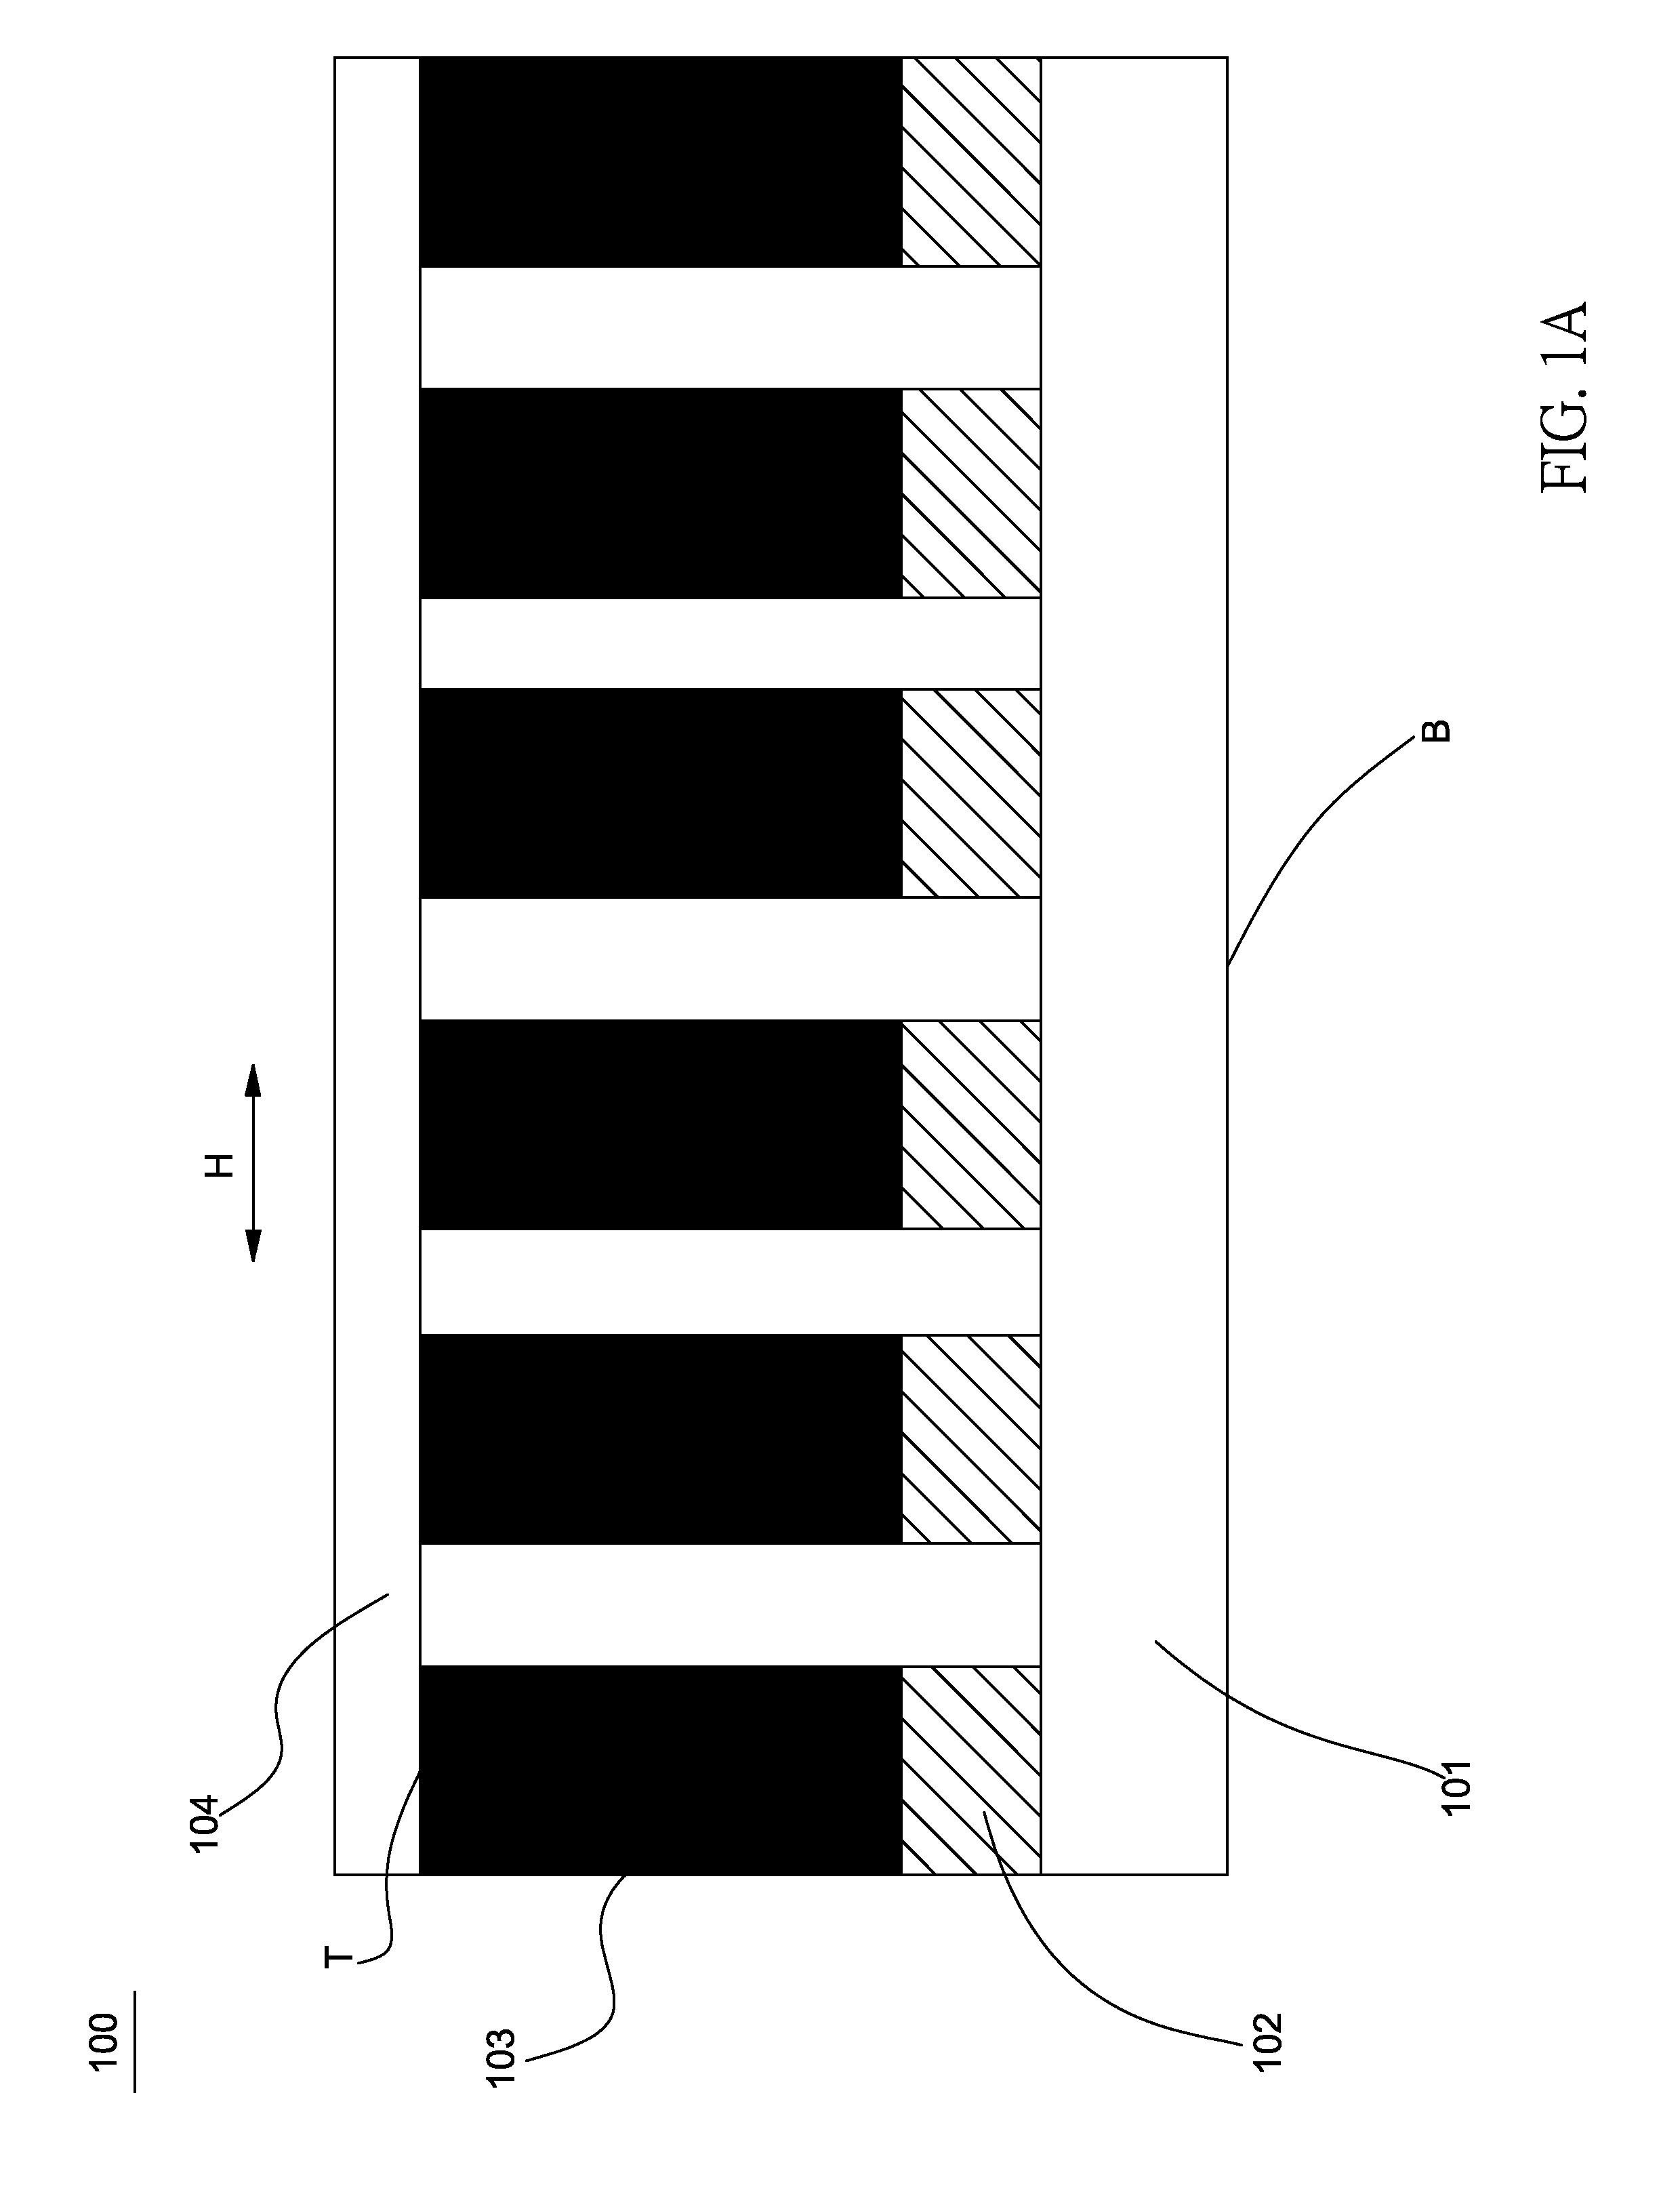 Epitaxial structure and growth thereof